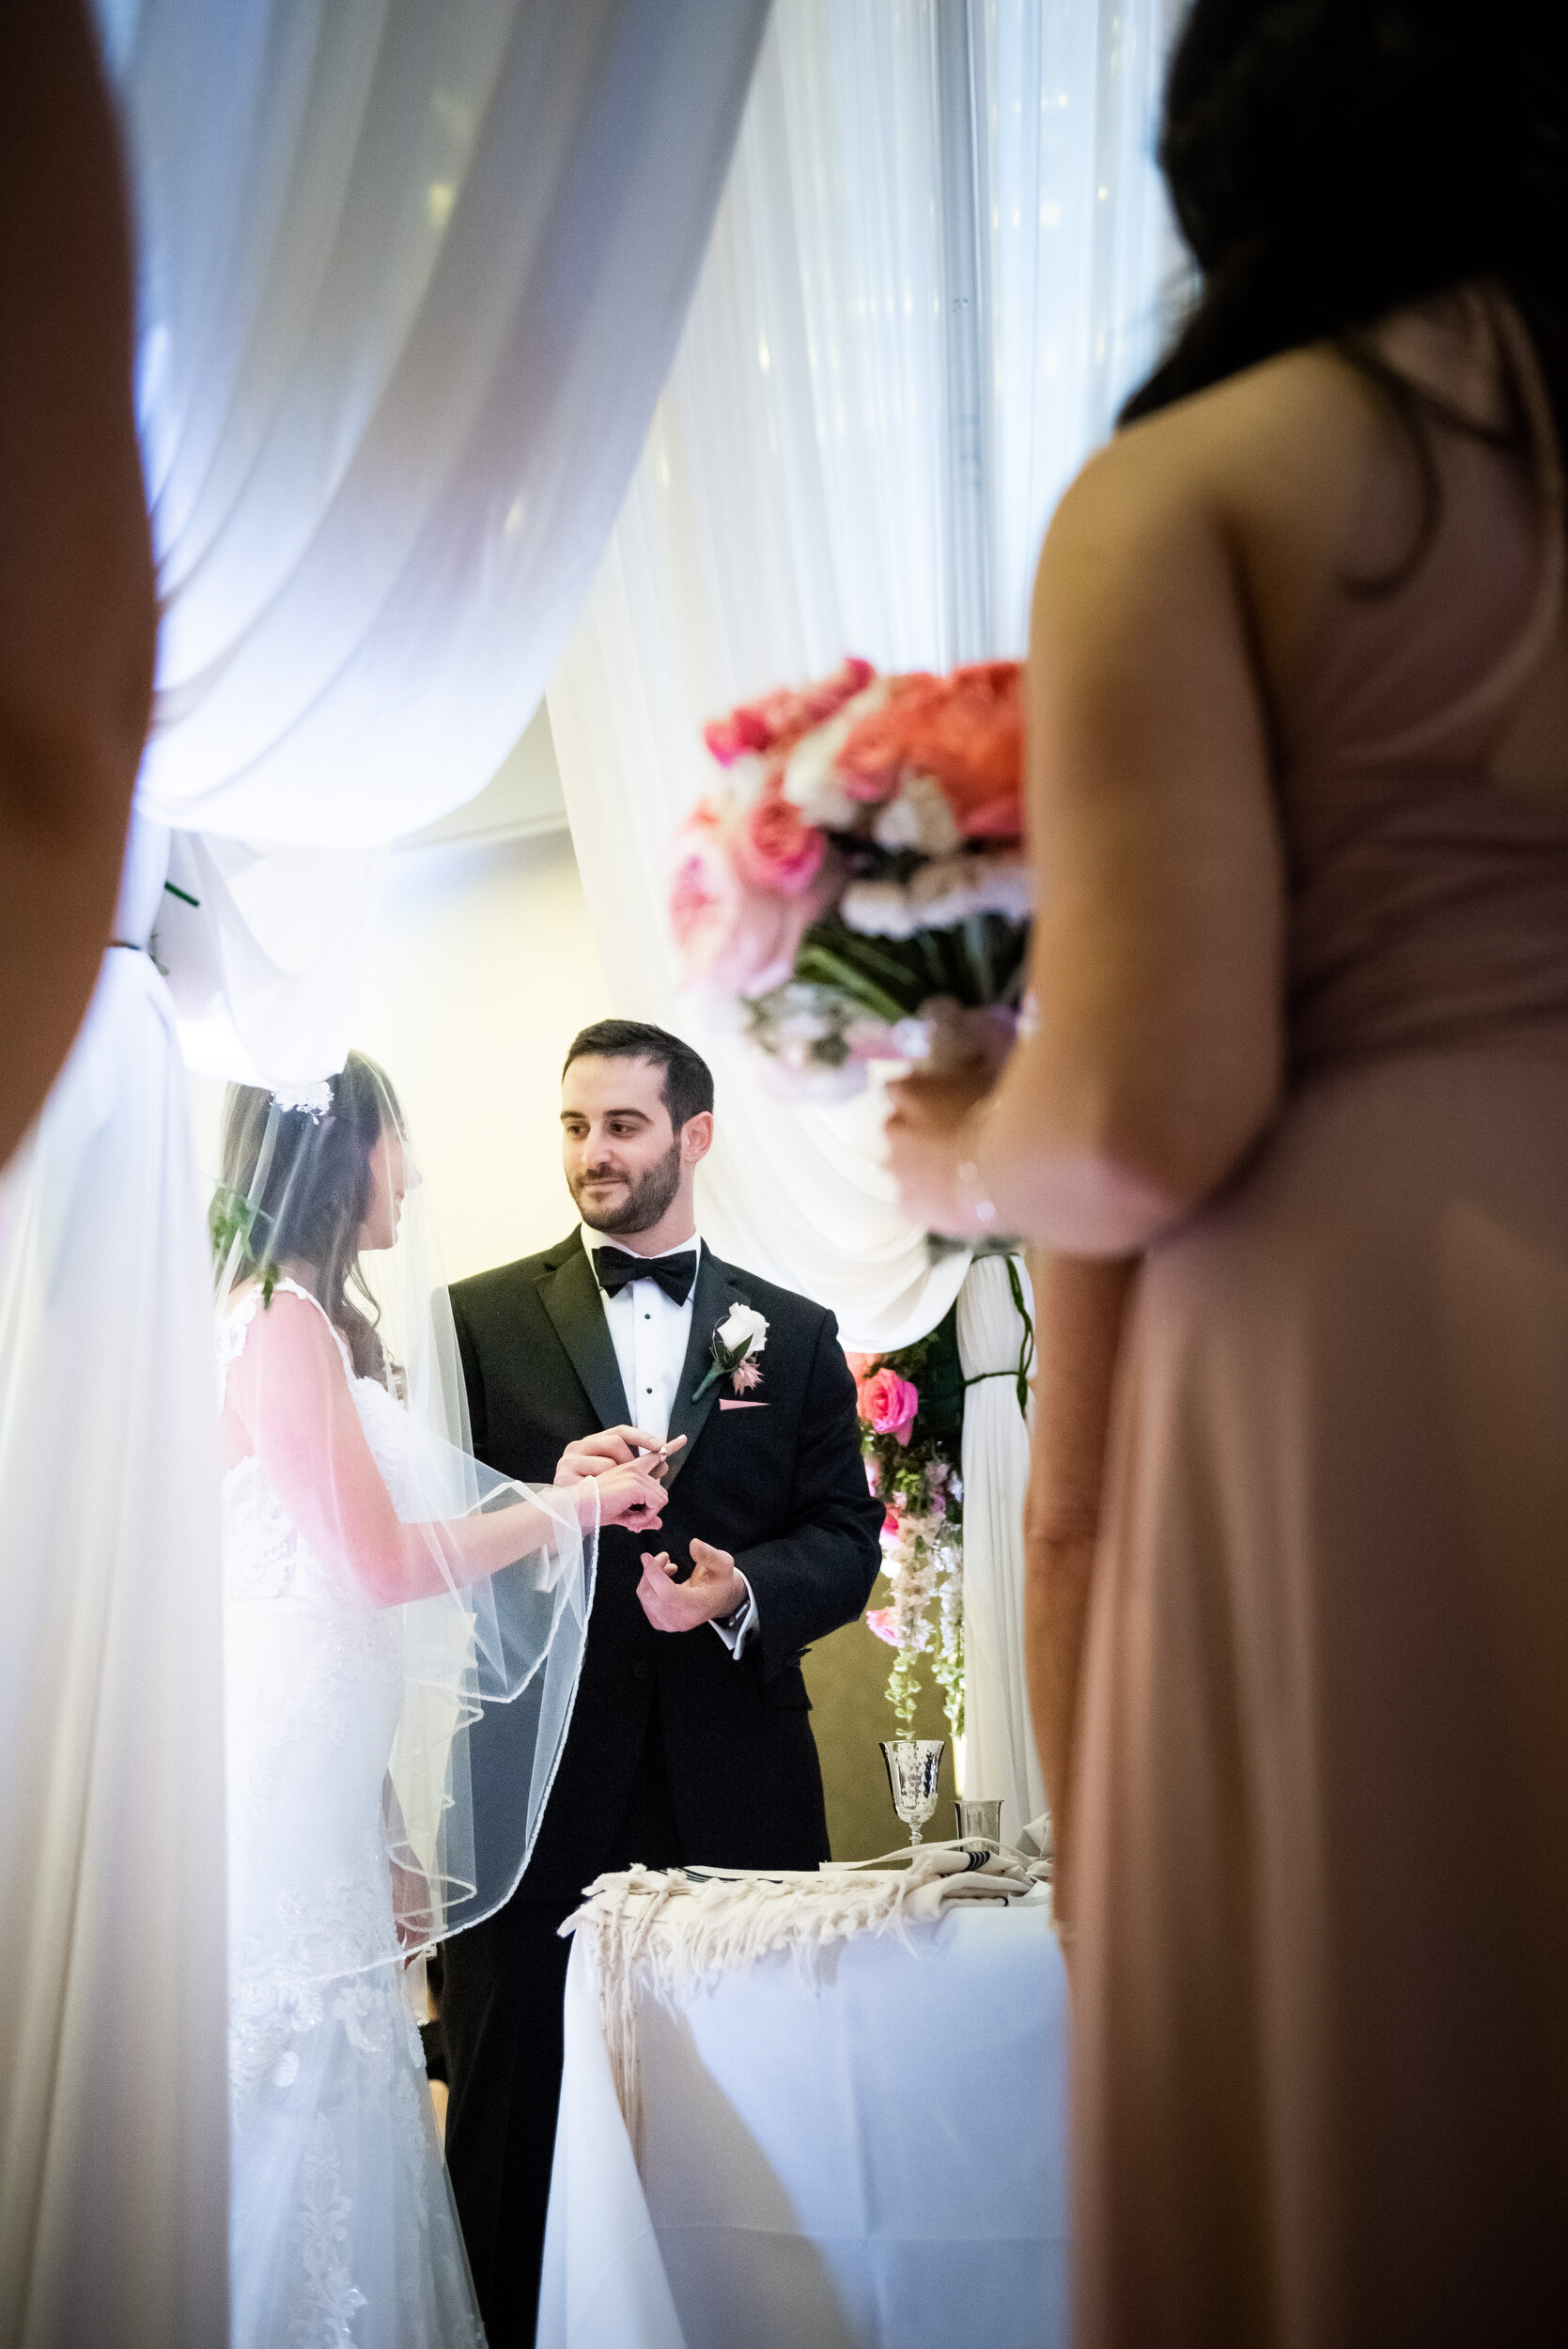 Wedding ceremony photography: Loews Chicago Hotel Wedding captured by J. Brown Photography